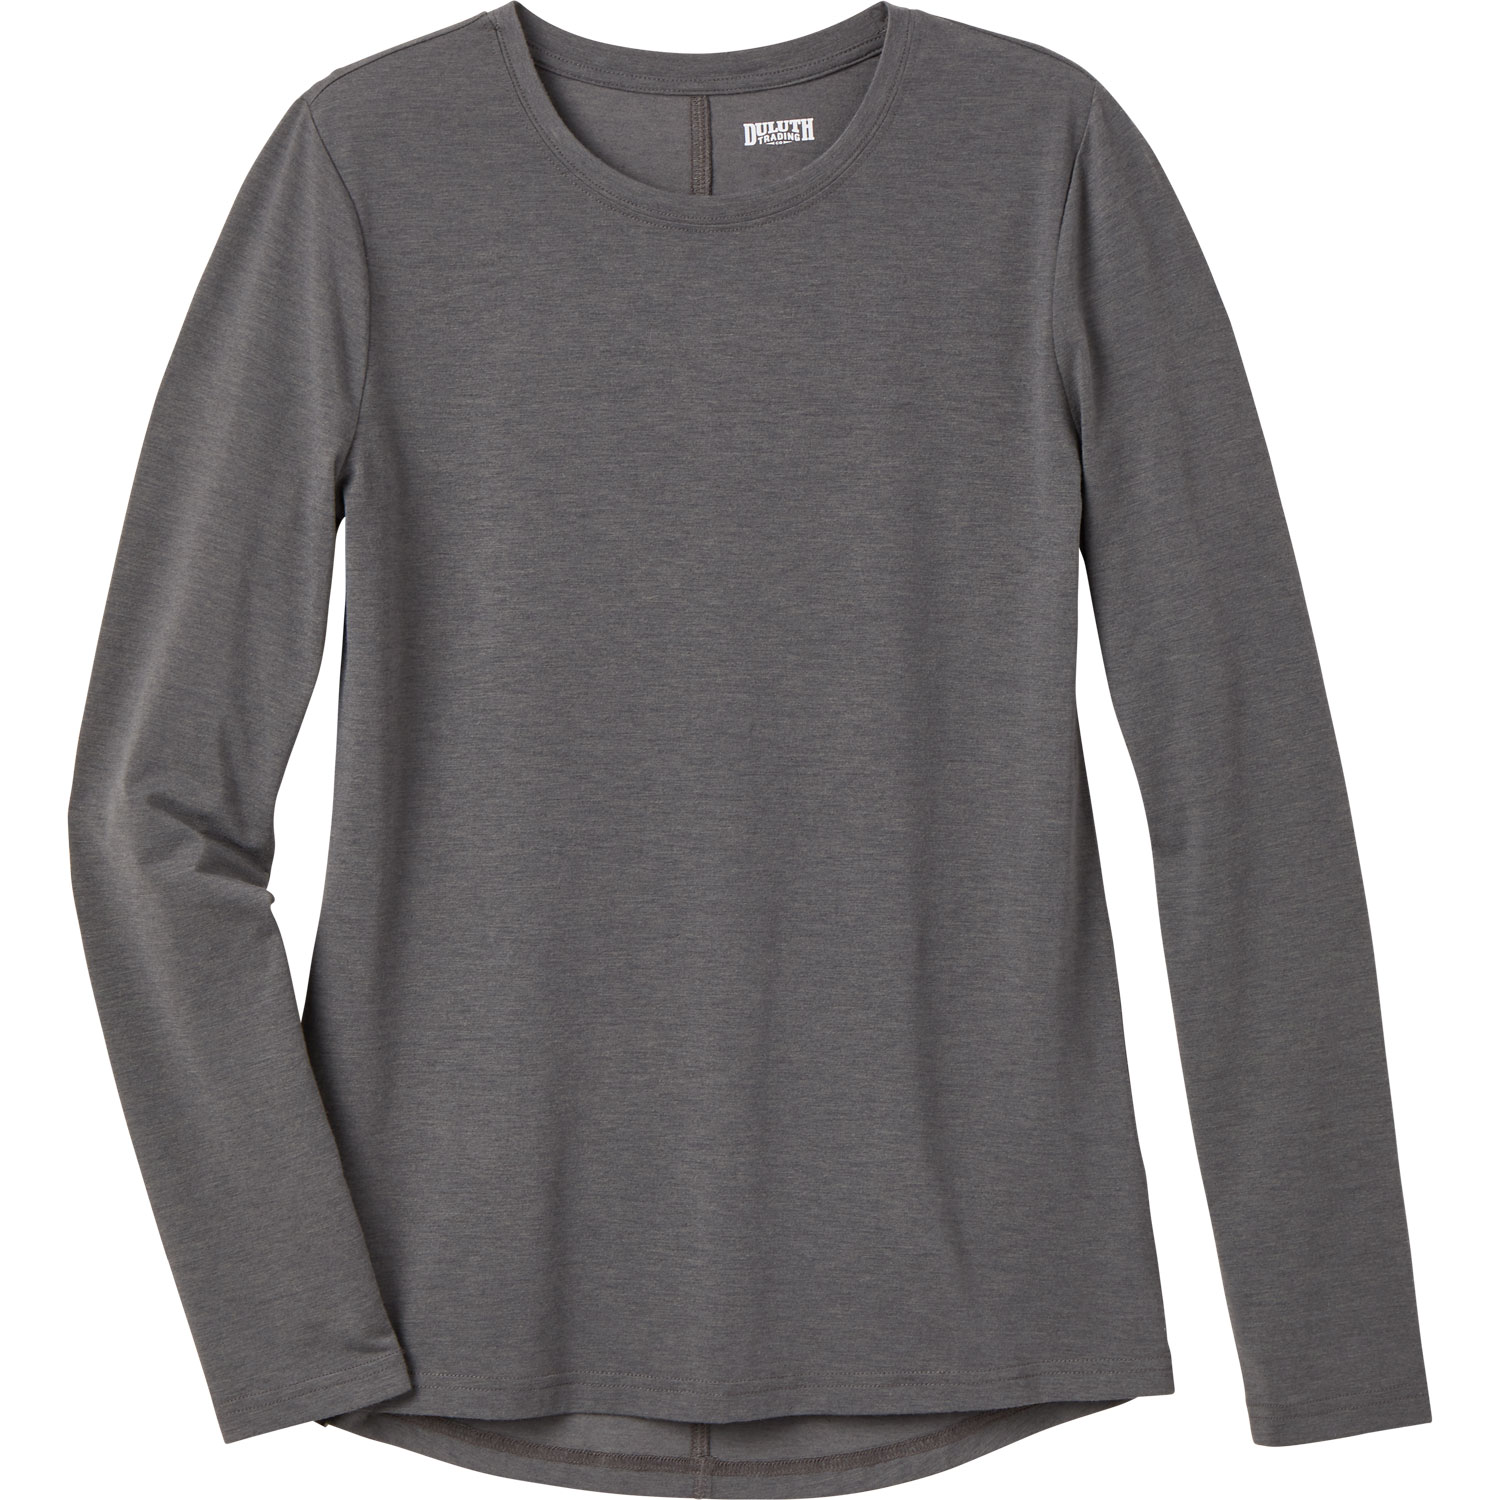 Women's Dry and Mighty Long Sleeve Crewneck